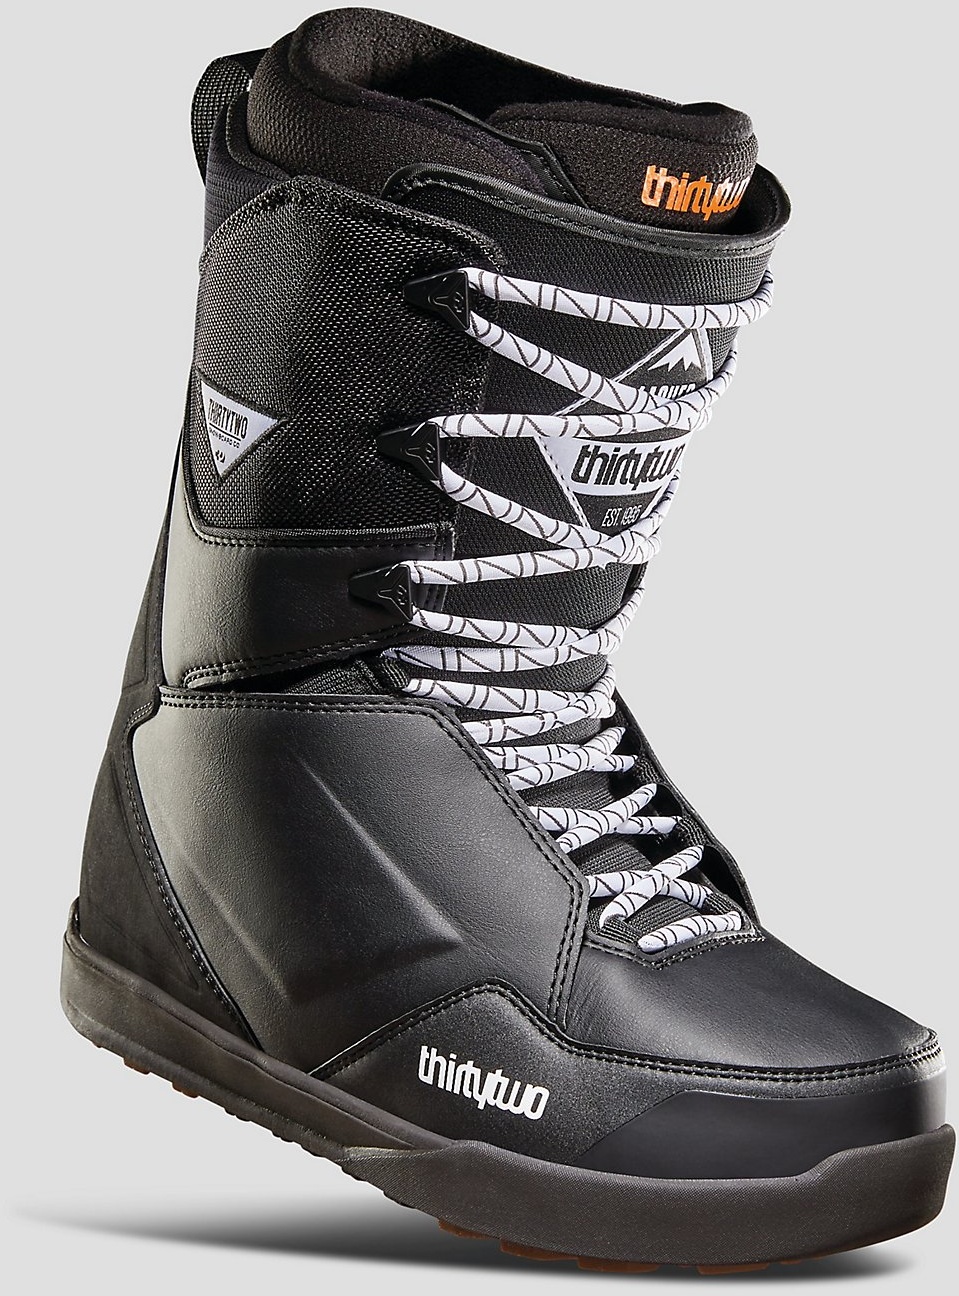 ThirtyTwo Lashed Snowboard-Boots black Gr. 13.0